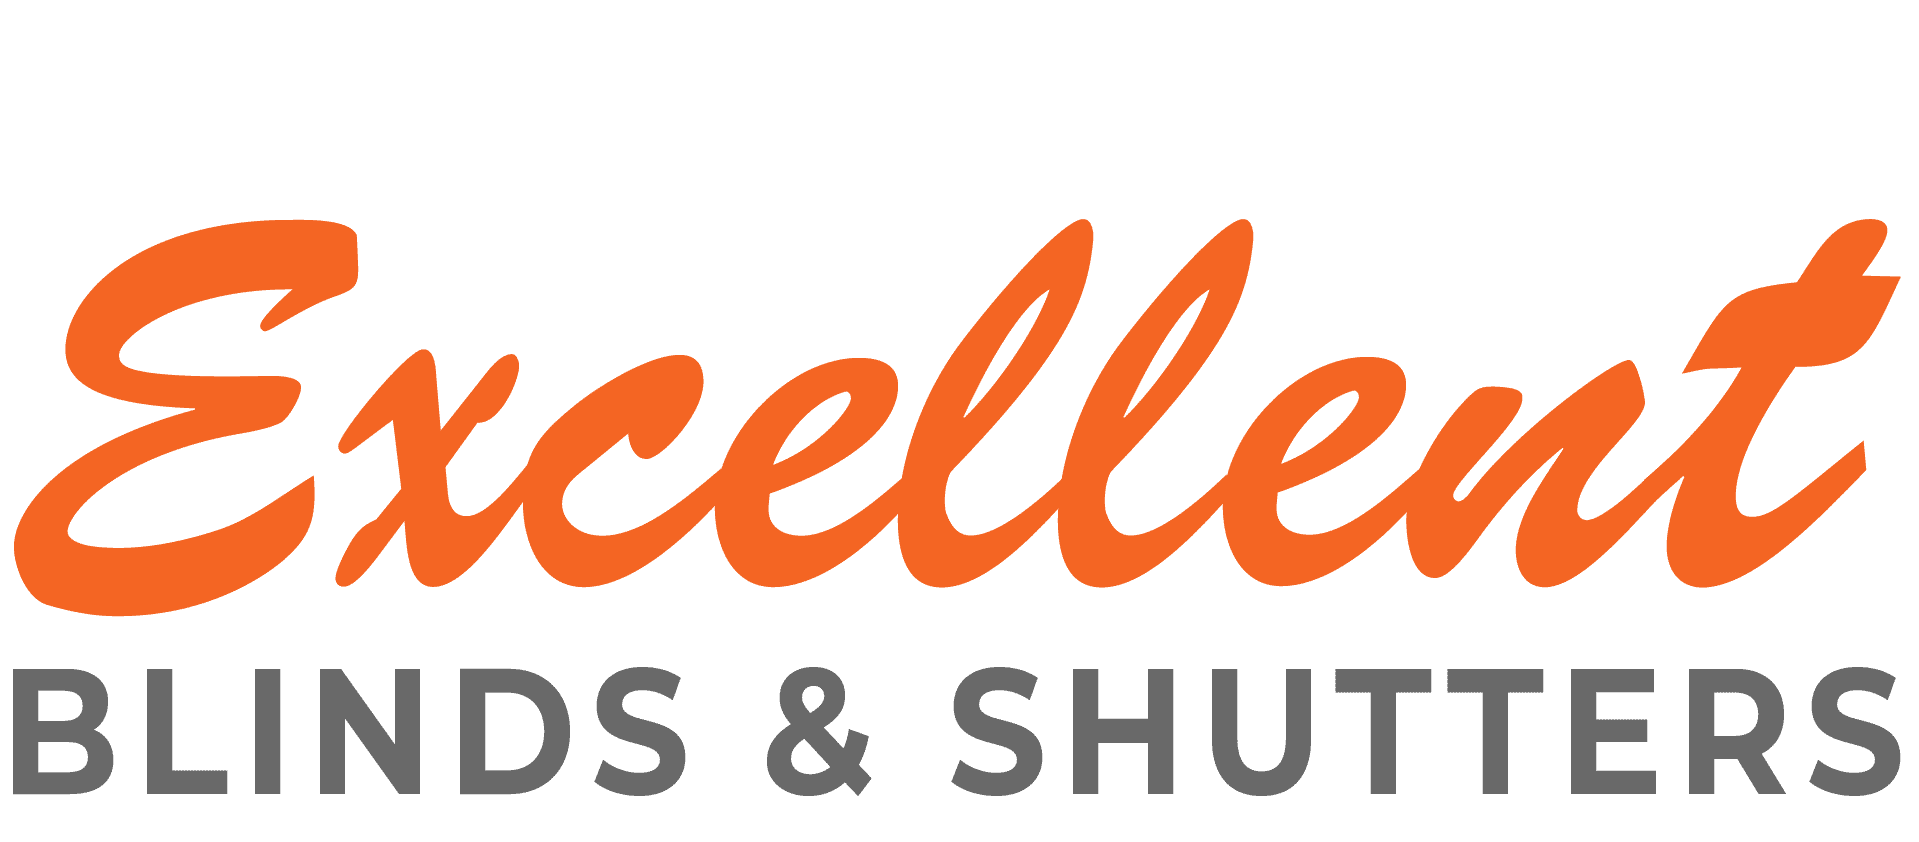 Excellent Blinds and Shutters Logo